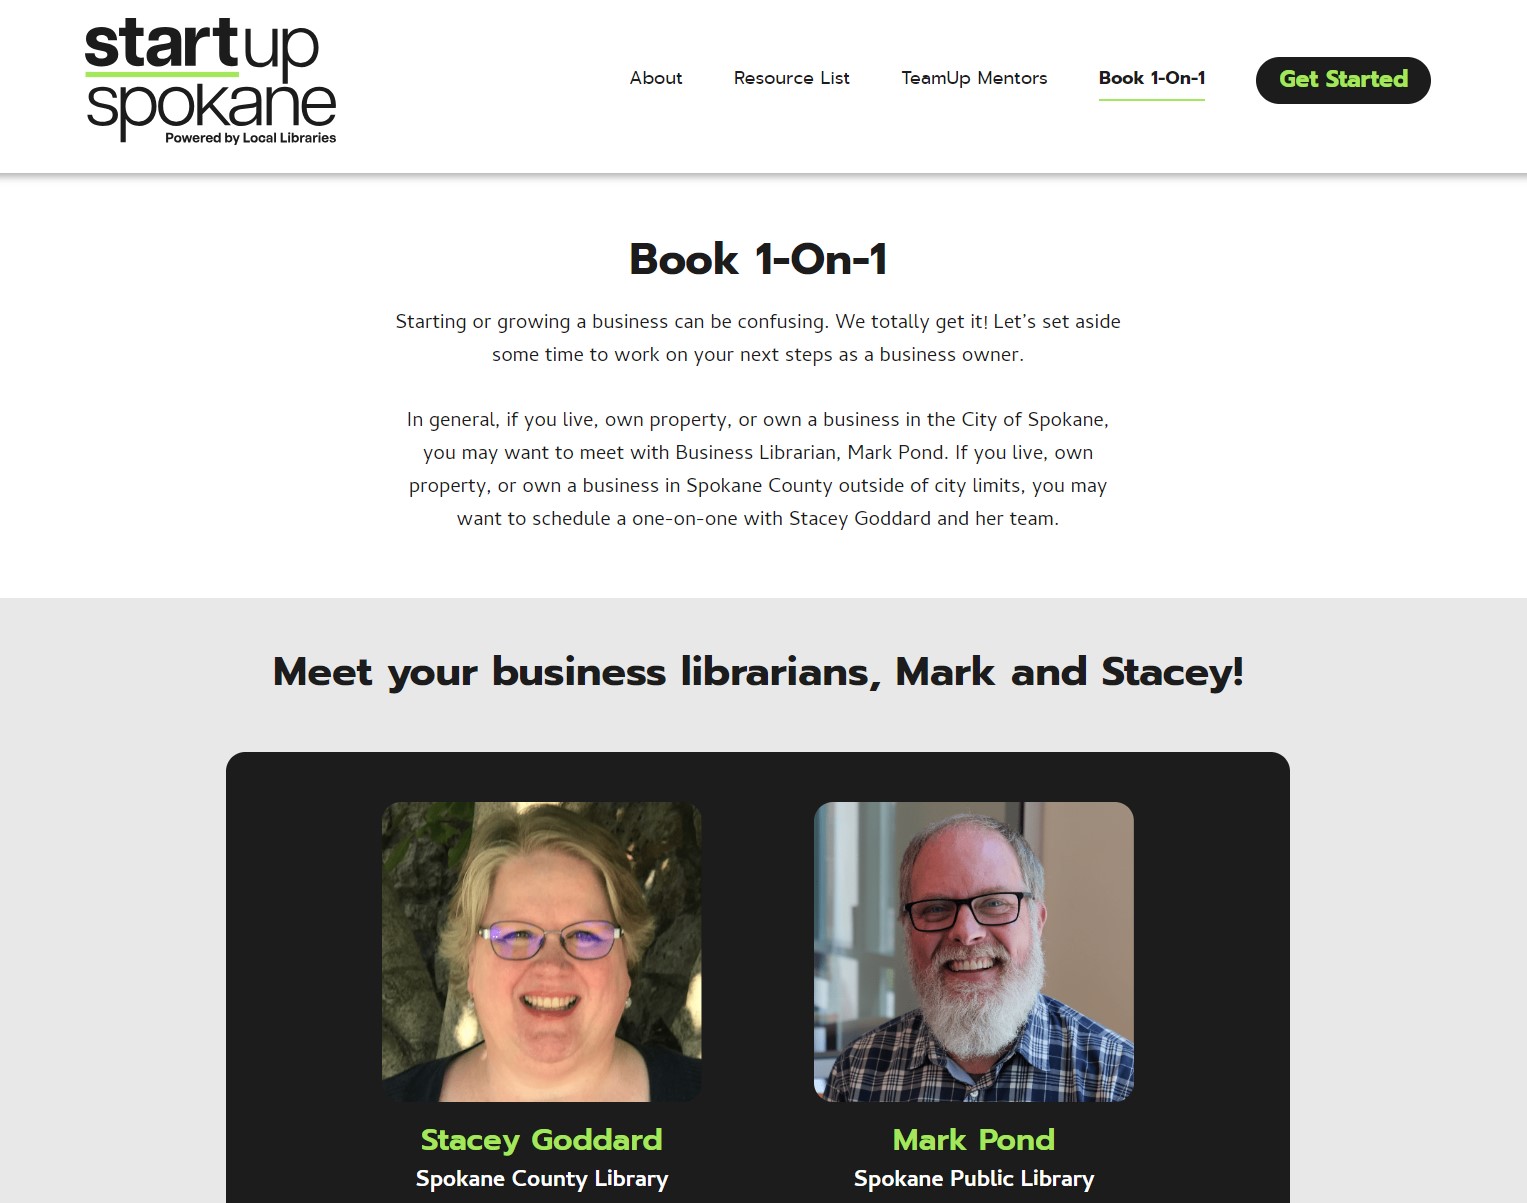 Screenshot of the Book 1-on-1 webpage for the StartUp Spokane website